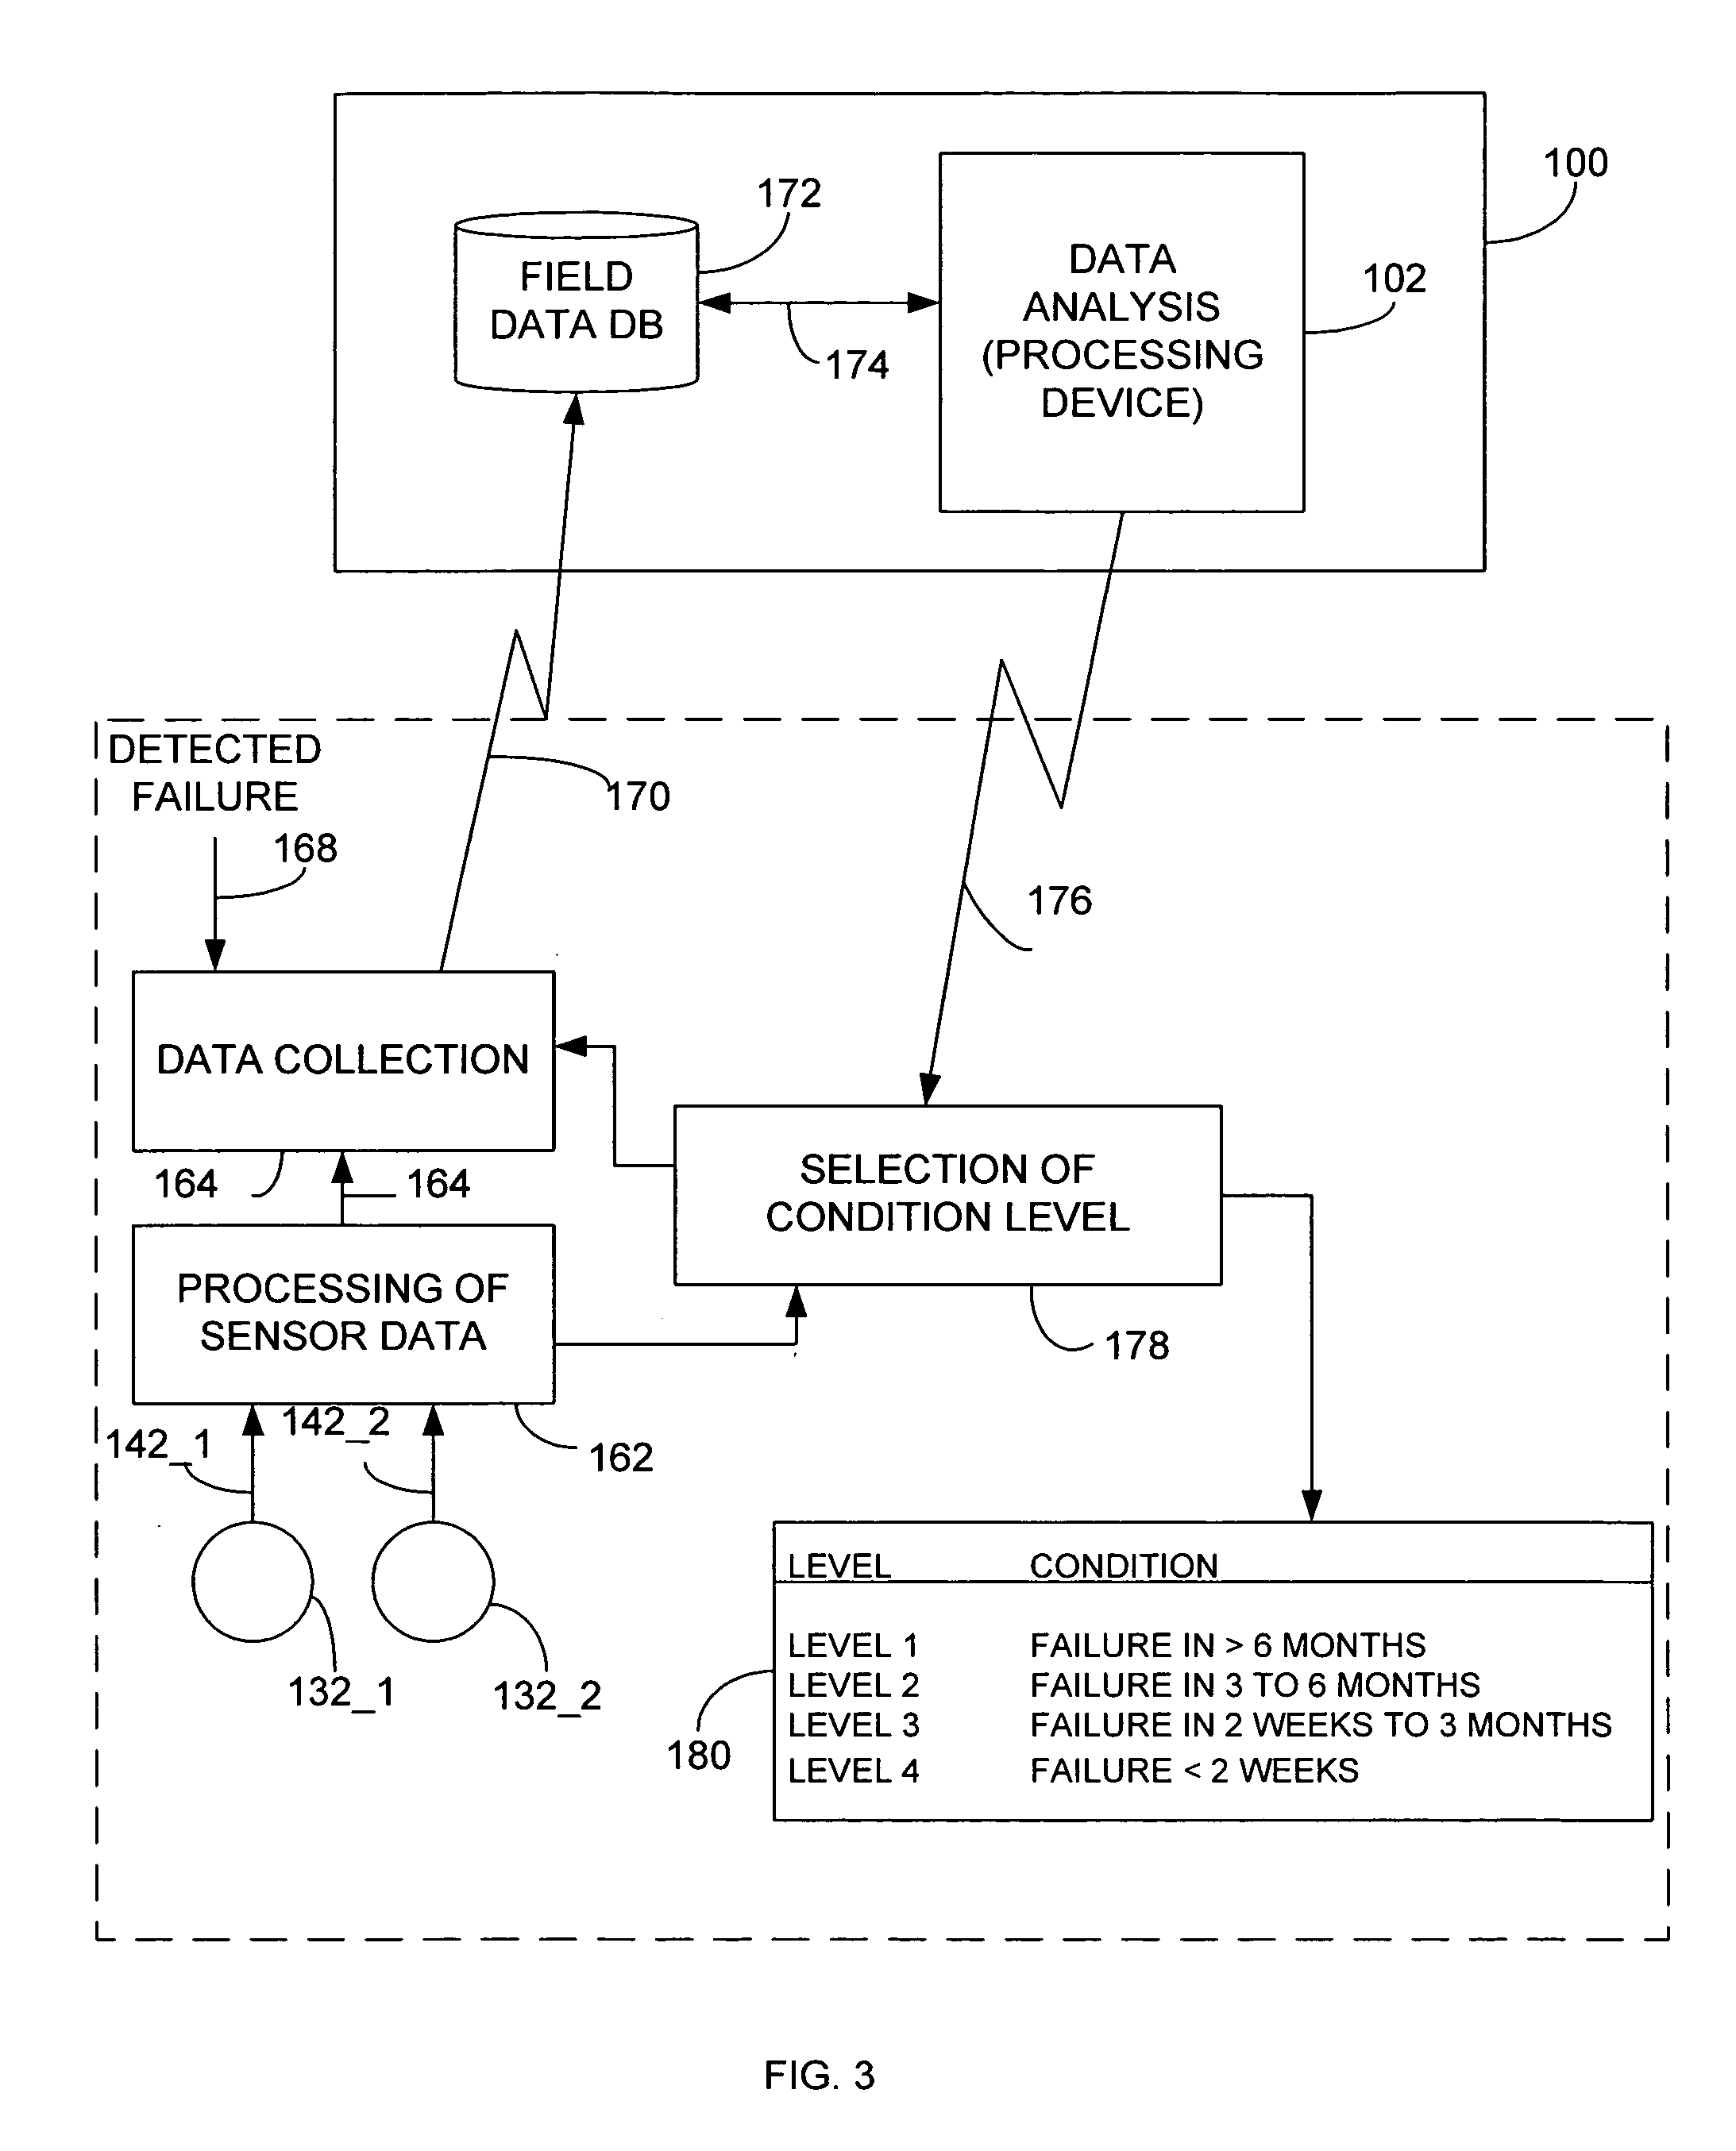 Predictive fault determination for a non-stationary device